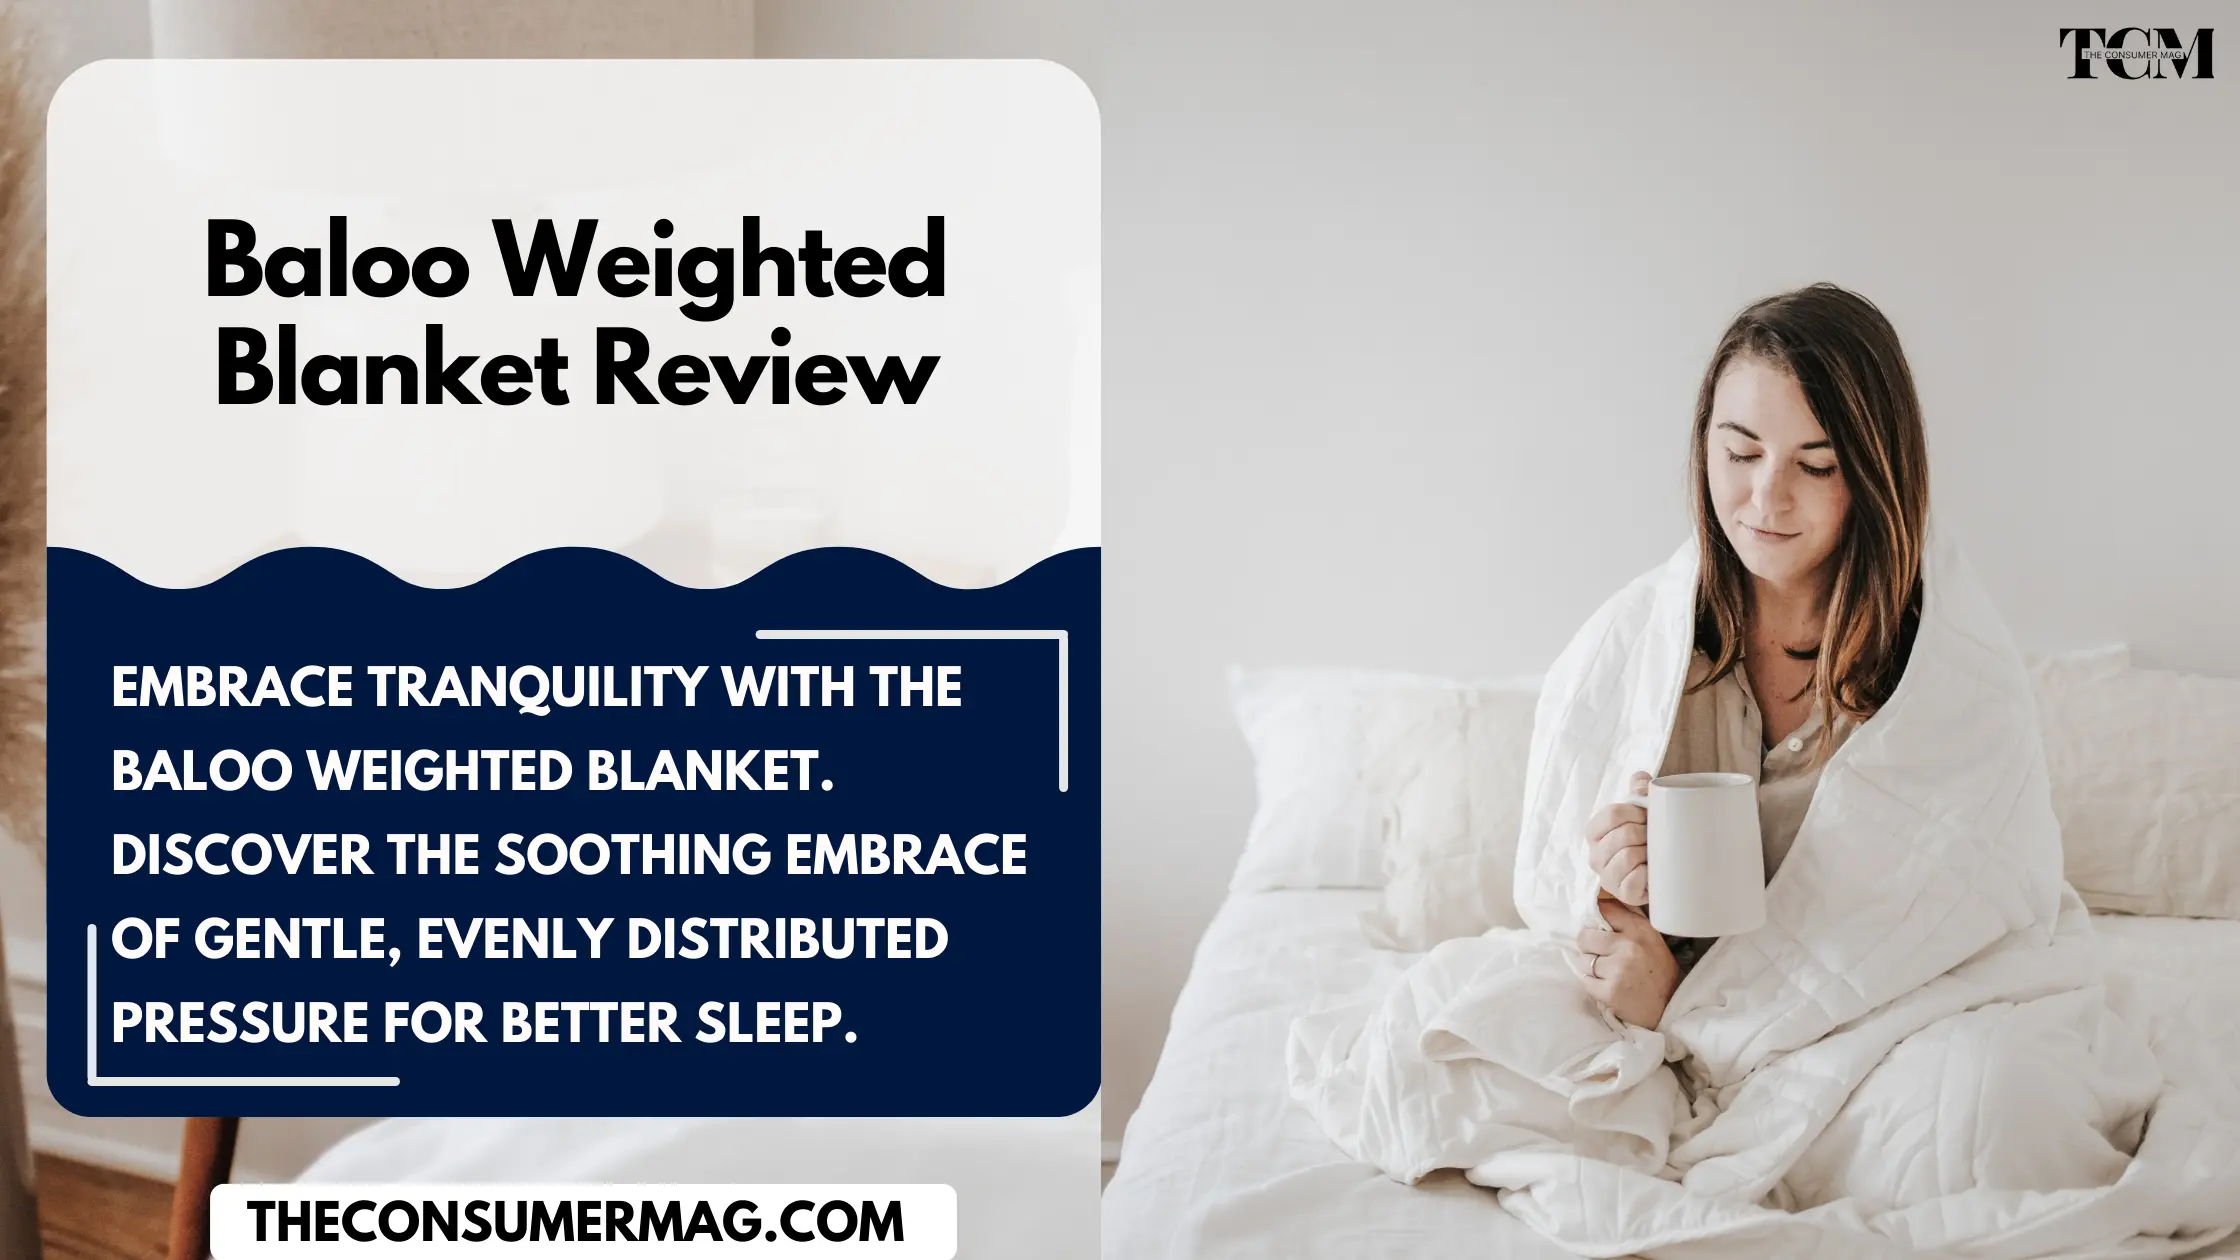 Baloo Weighted Blanket Review | Read All Baloo Weighted Blanket Reviews